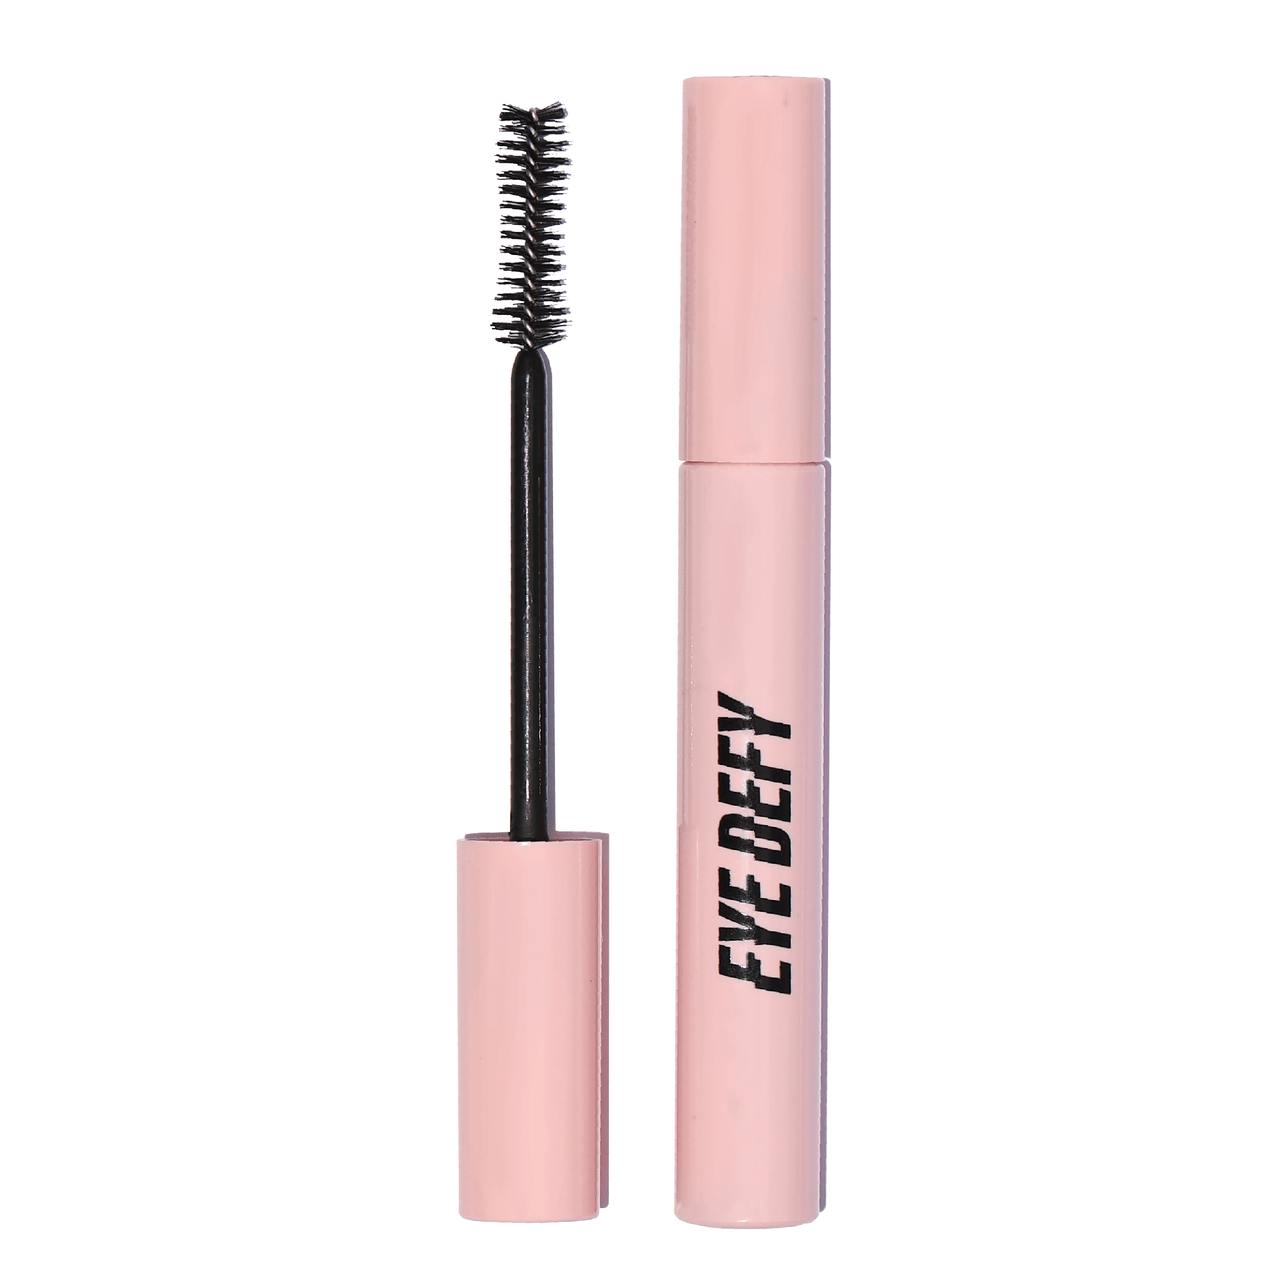 Eye Defy Zero Gravity Mascara with biotin-boosted formula and peptide blend for stronger lashes, hourglass brush wand, in a pink and black tube.